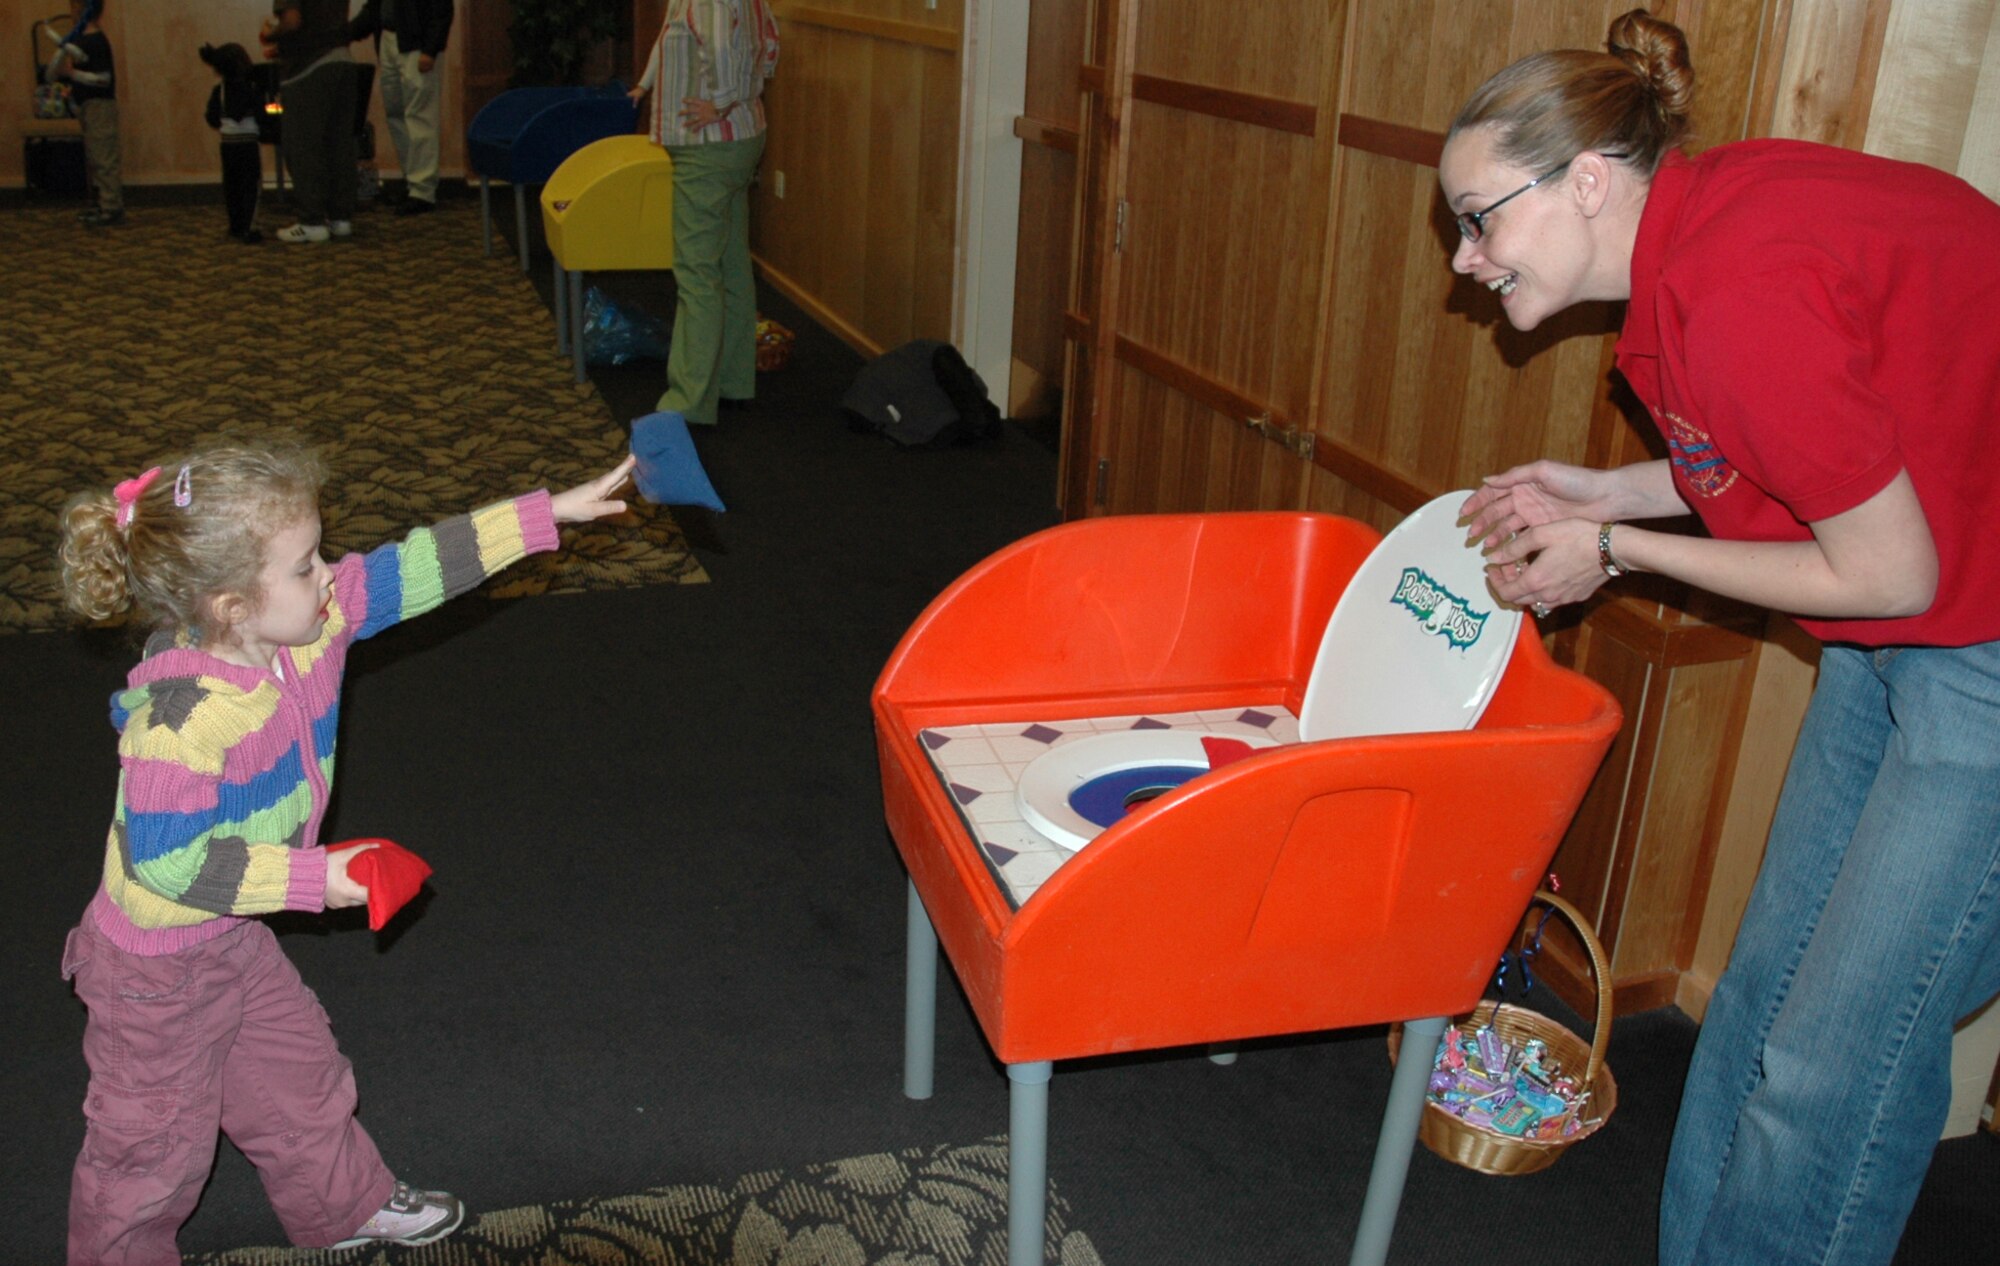 Hannah Smith, 3, tries the Potty Toss game as Tech. Sgt. Jennifer Lyon, Airman & Family Readiness Center, cheers her on. The Potty Toss was just one of many games at the Welcome Home Carnival at Club Hill on March 12.